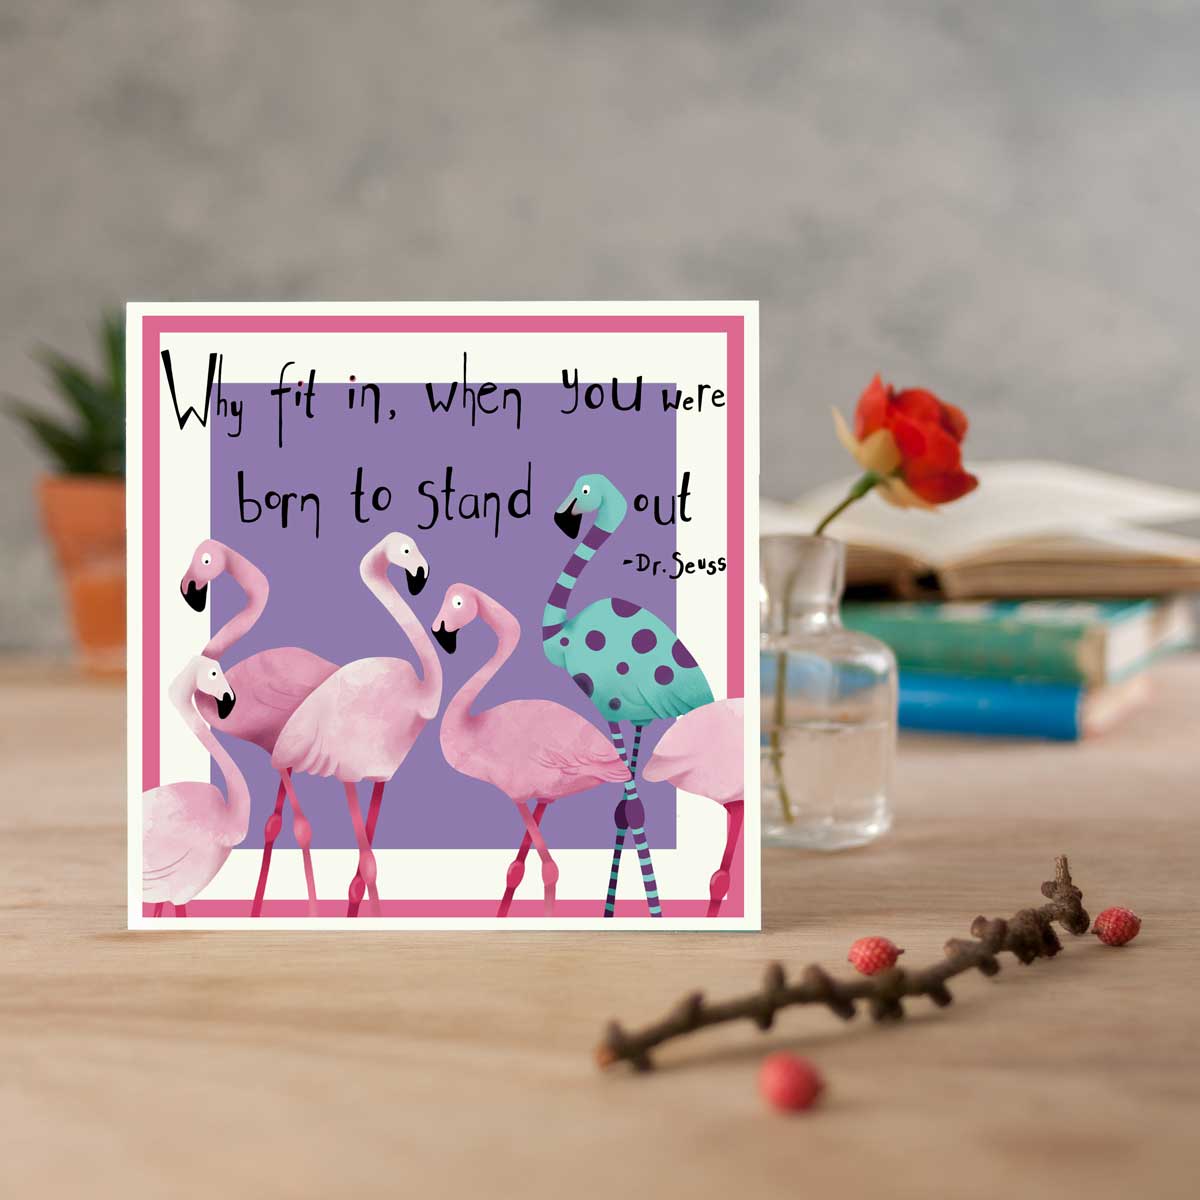 greetings card with flamingoes and the Dr Suess comment, why fit in when you were born to stand out